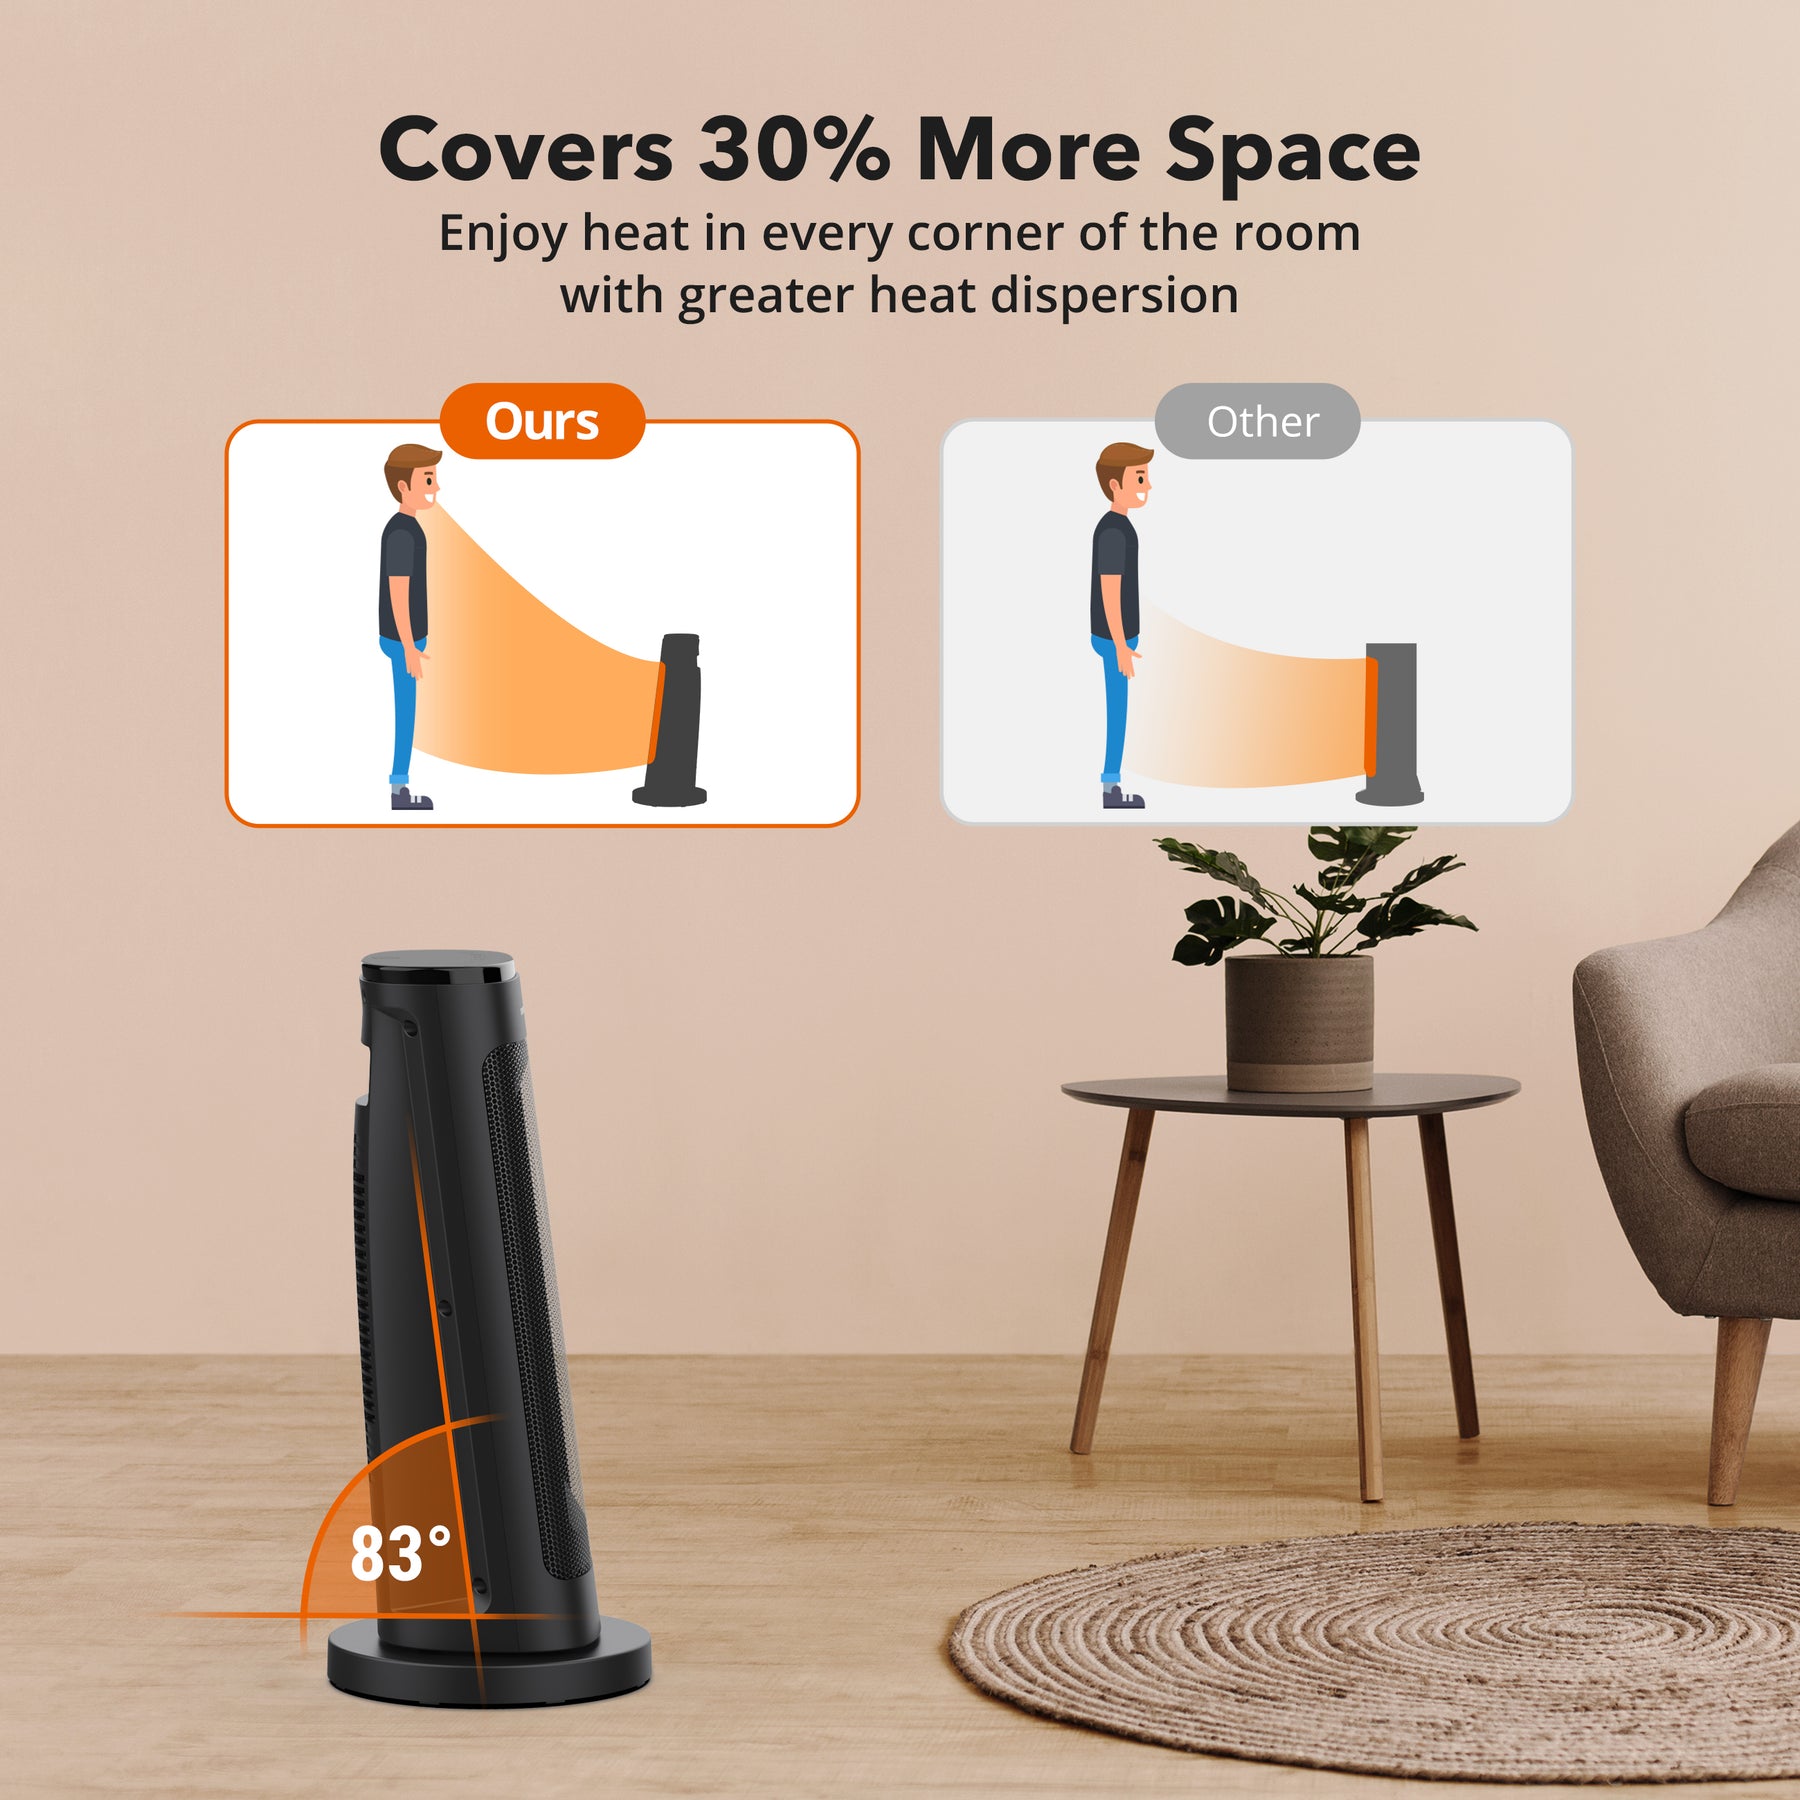 Save 10% on this personal space heater that could help you save on